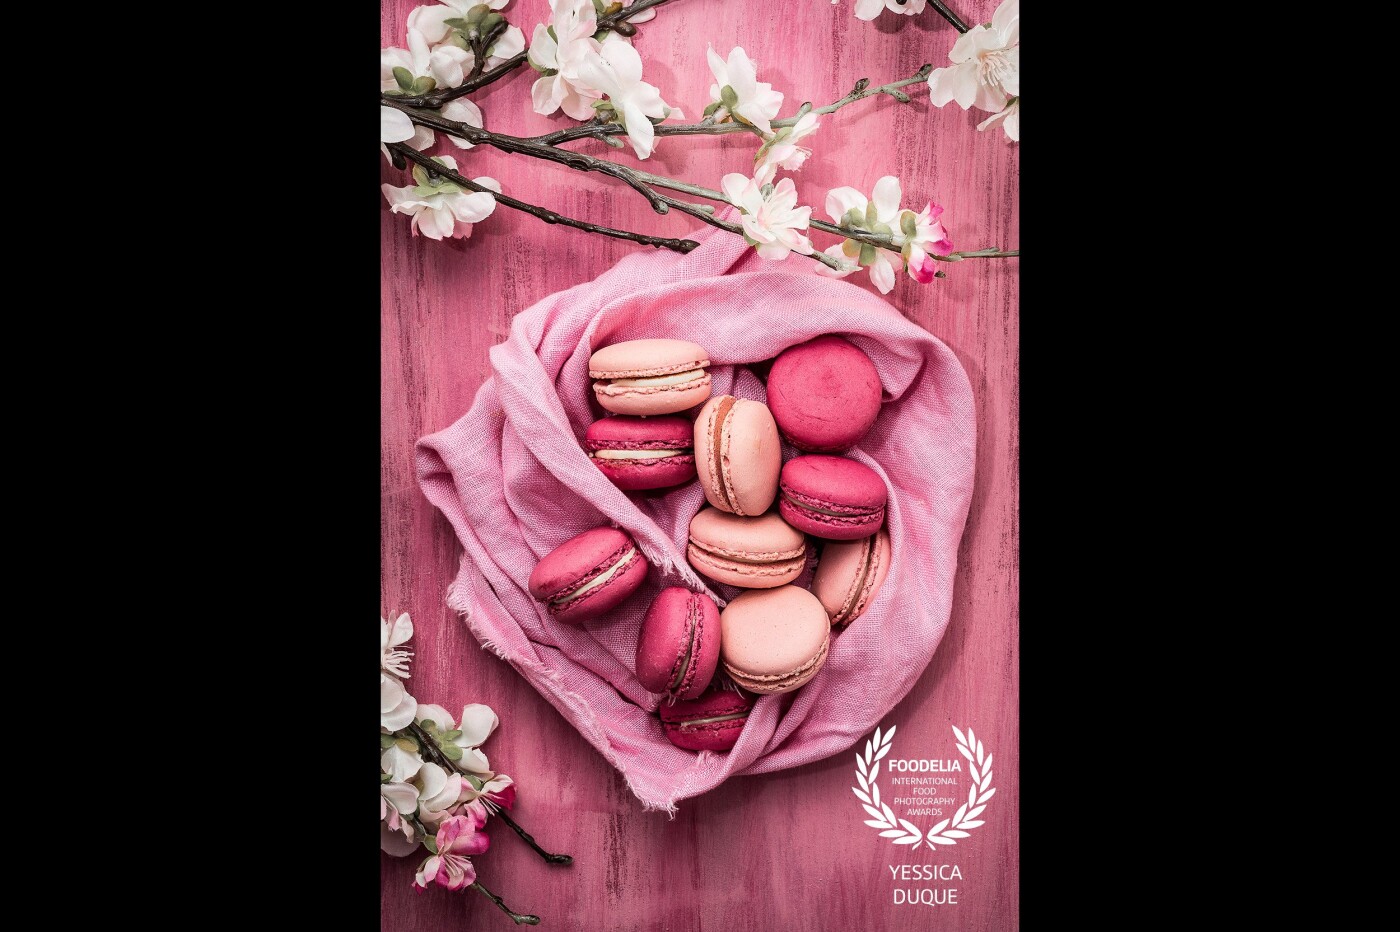 Treat yourself today...<br />
I just did Champagne & Raspberry macarons<br />
Canon EOS 5D Mark III<br />
Sigma 50mm F 1.4 art ƒ/10 1/60 ISO250